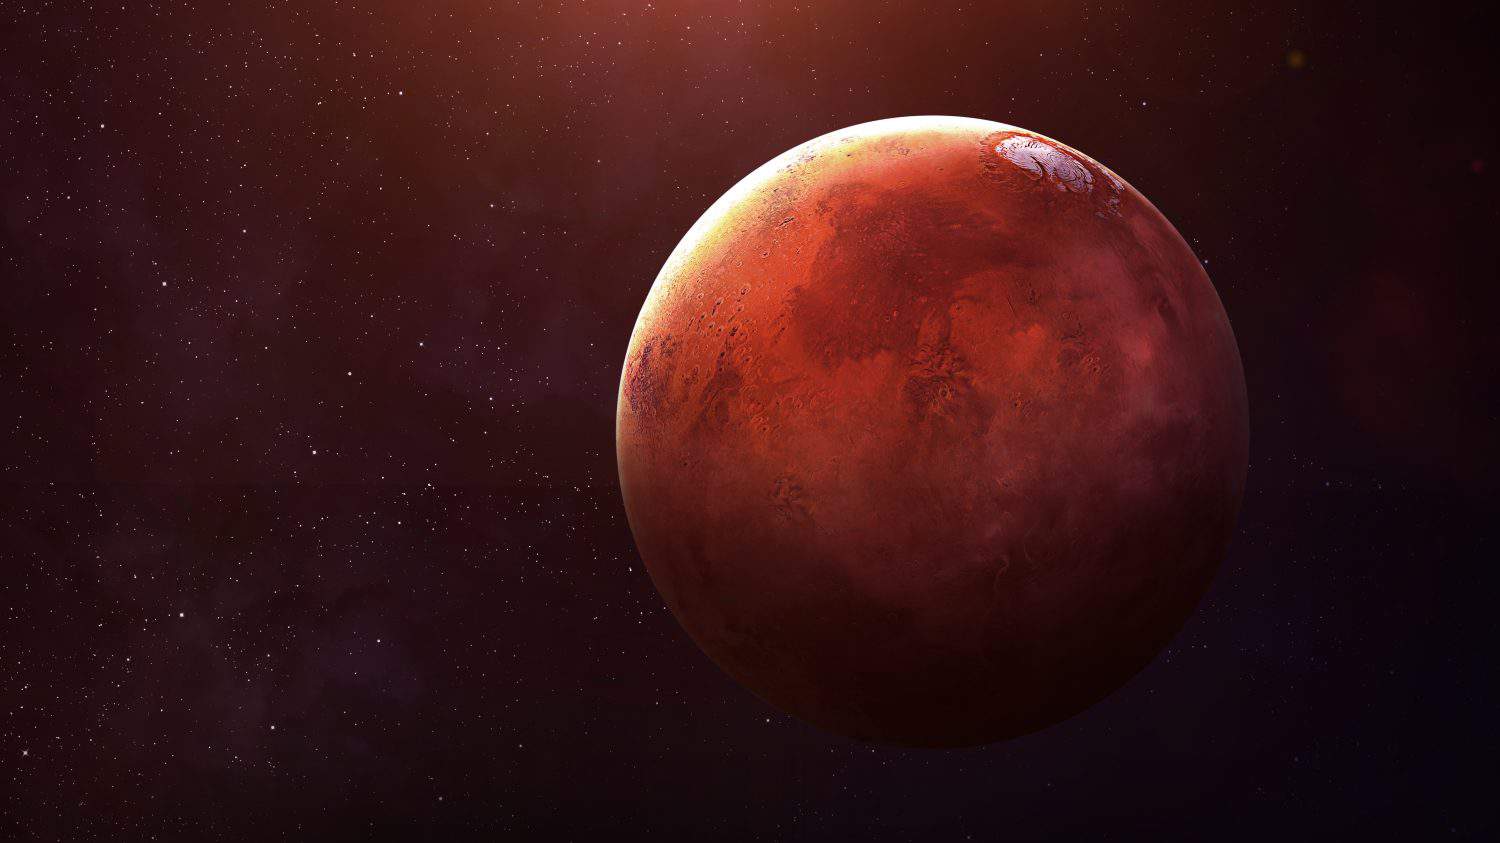 Mars - High resolution best quality solar system planet. This image elements furnished by NASA.